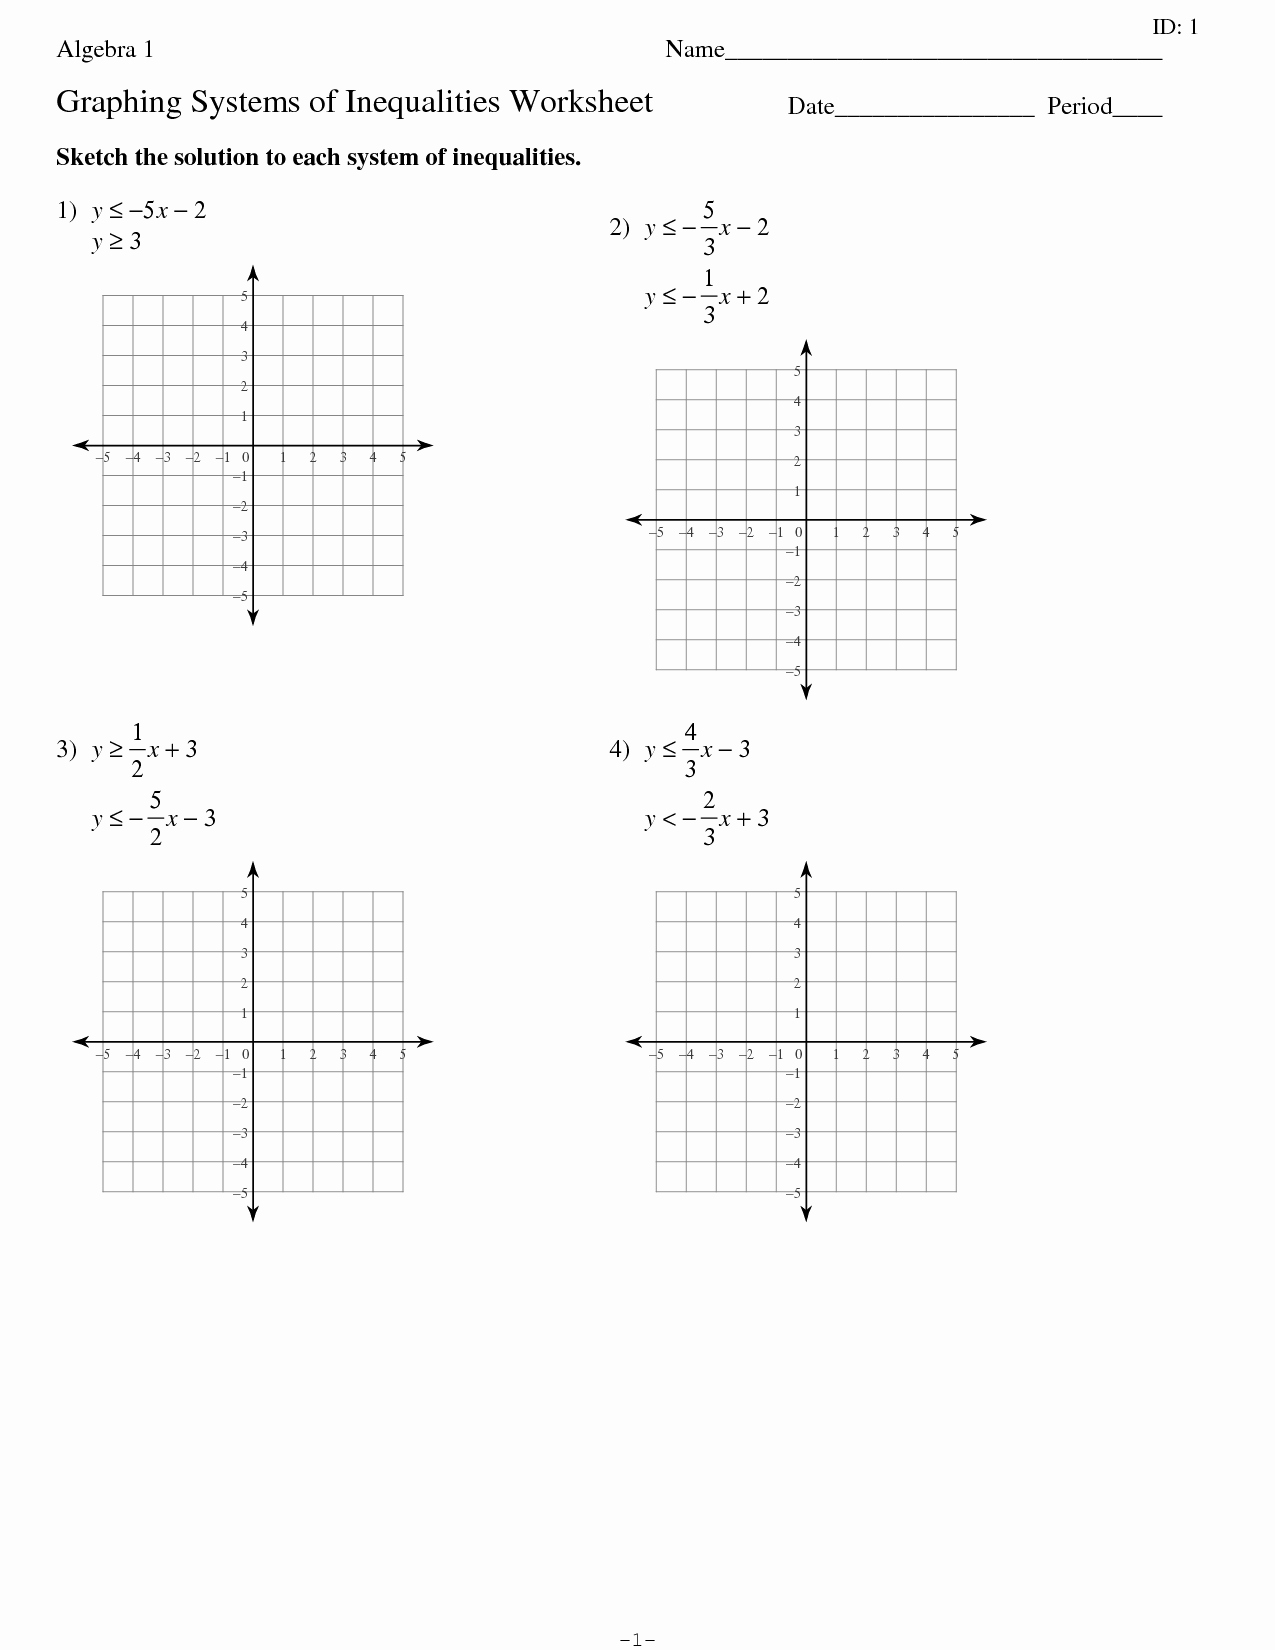 Graphing Linear Equations Worksheet Answers Lovely solving Quadratic Equations by Graphing Worksheet Answers